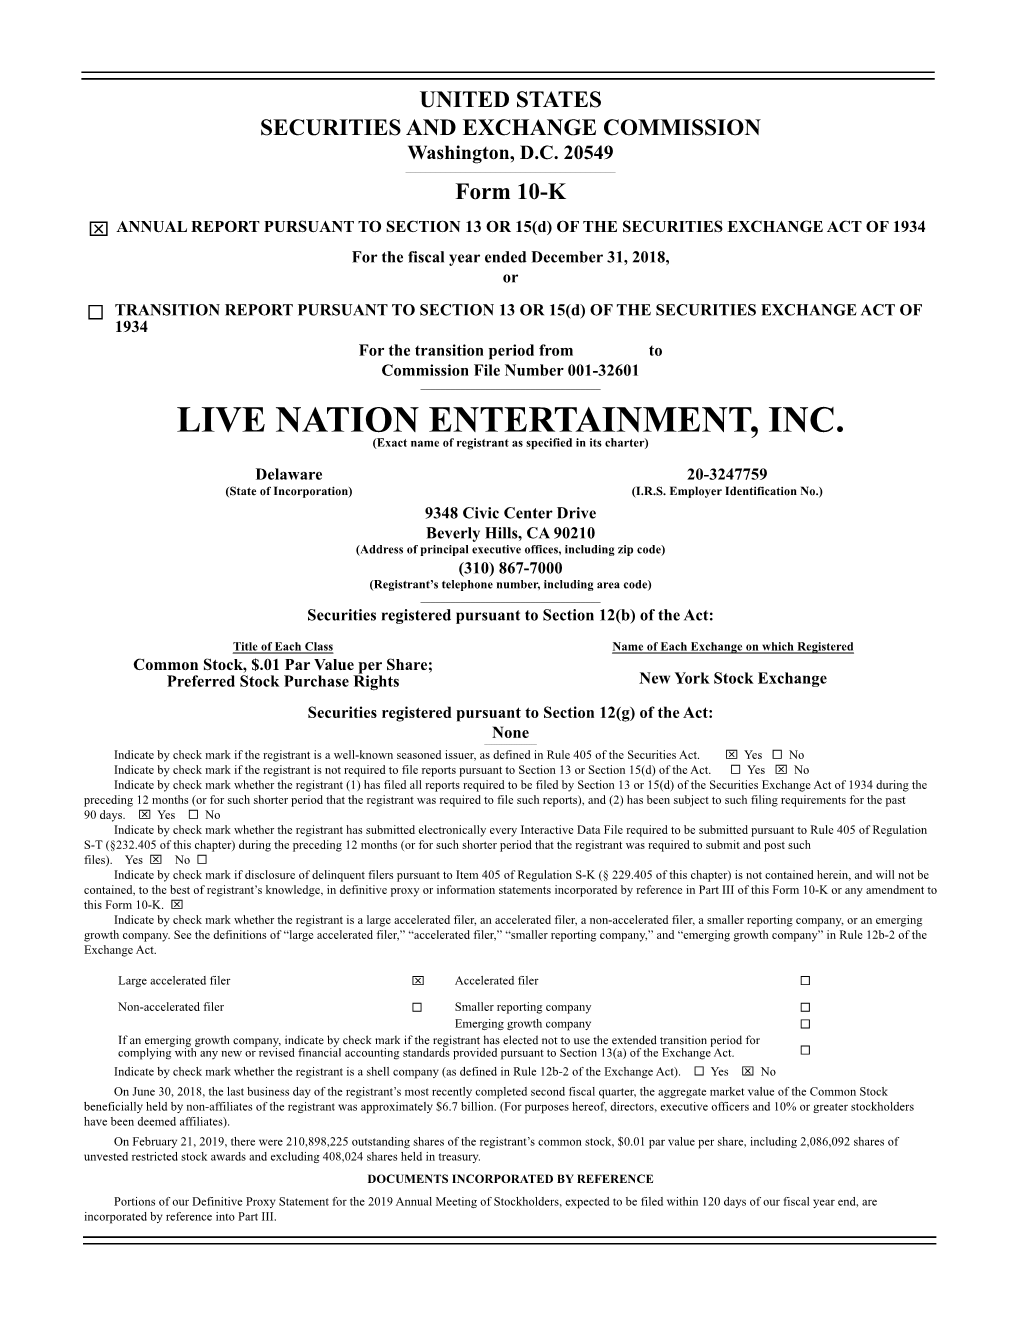 LIVE NATION ENTERTAINMENT, INC. (Exact Name of Registrant As Specified in Its Charter)